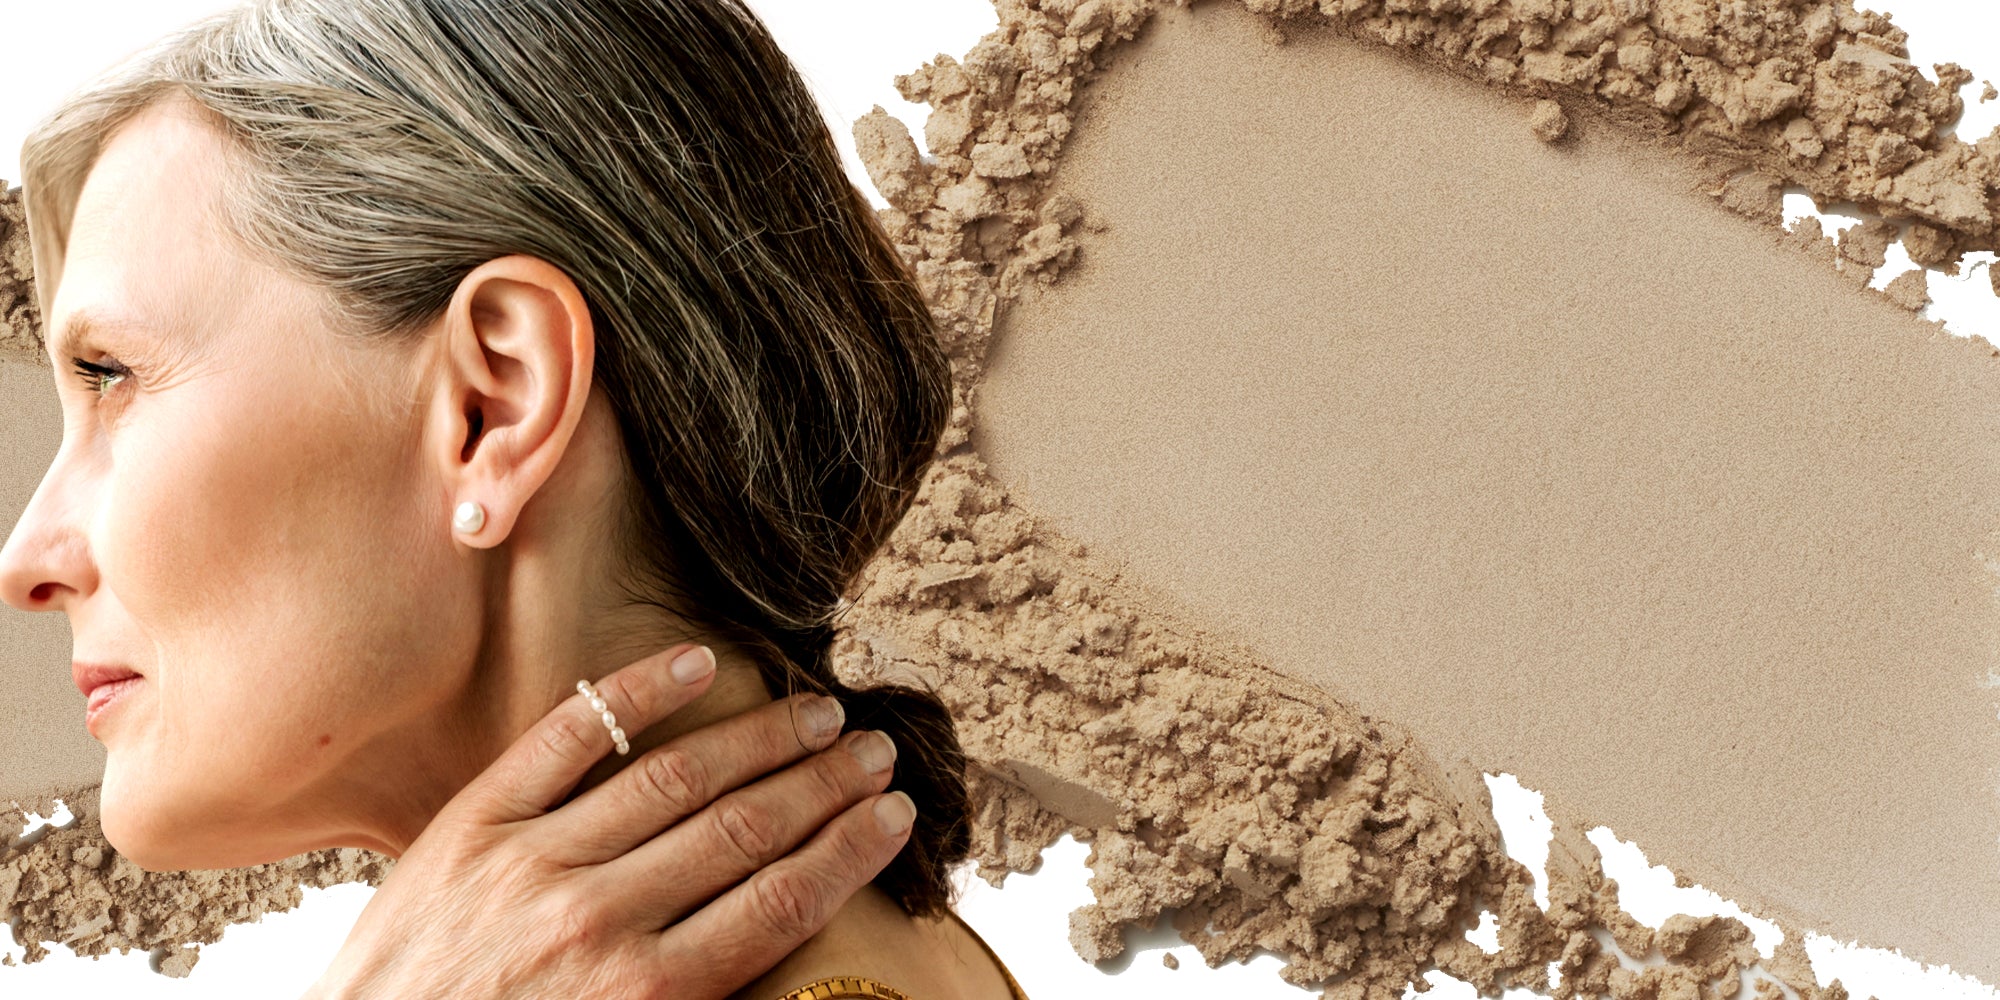 Foundation Powders - A Big Win For Mature Skin